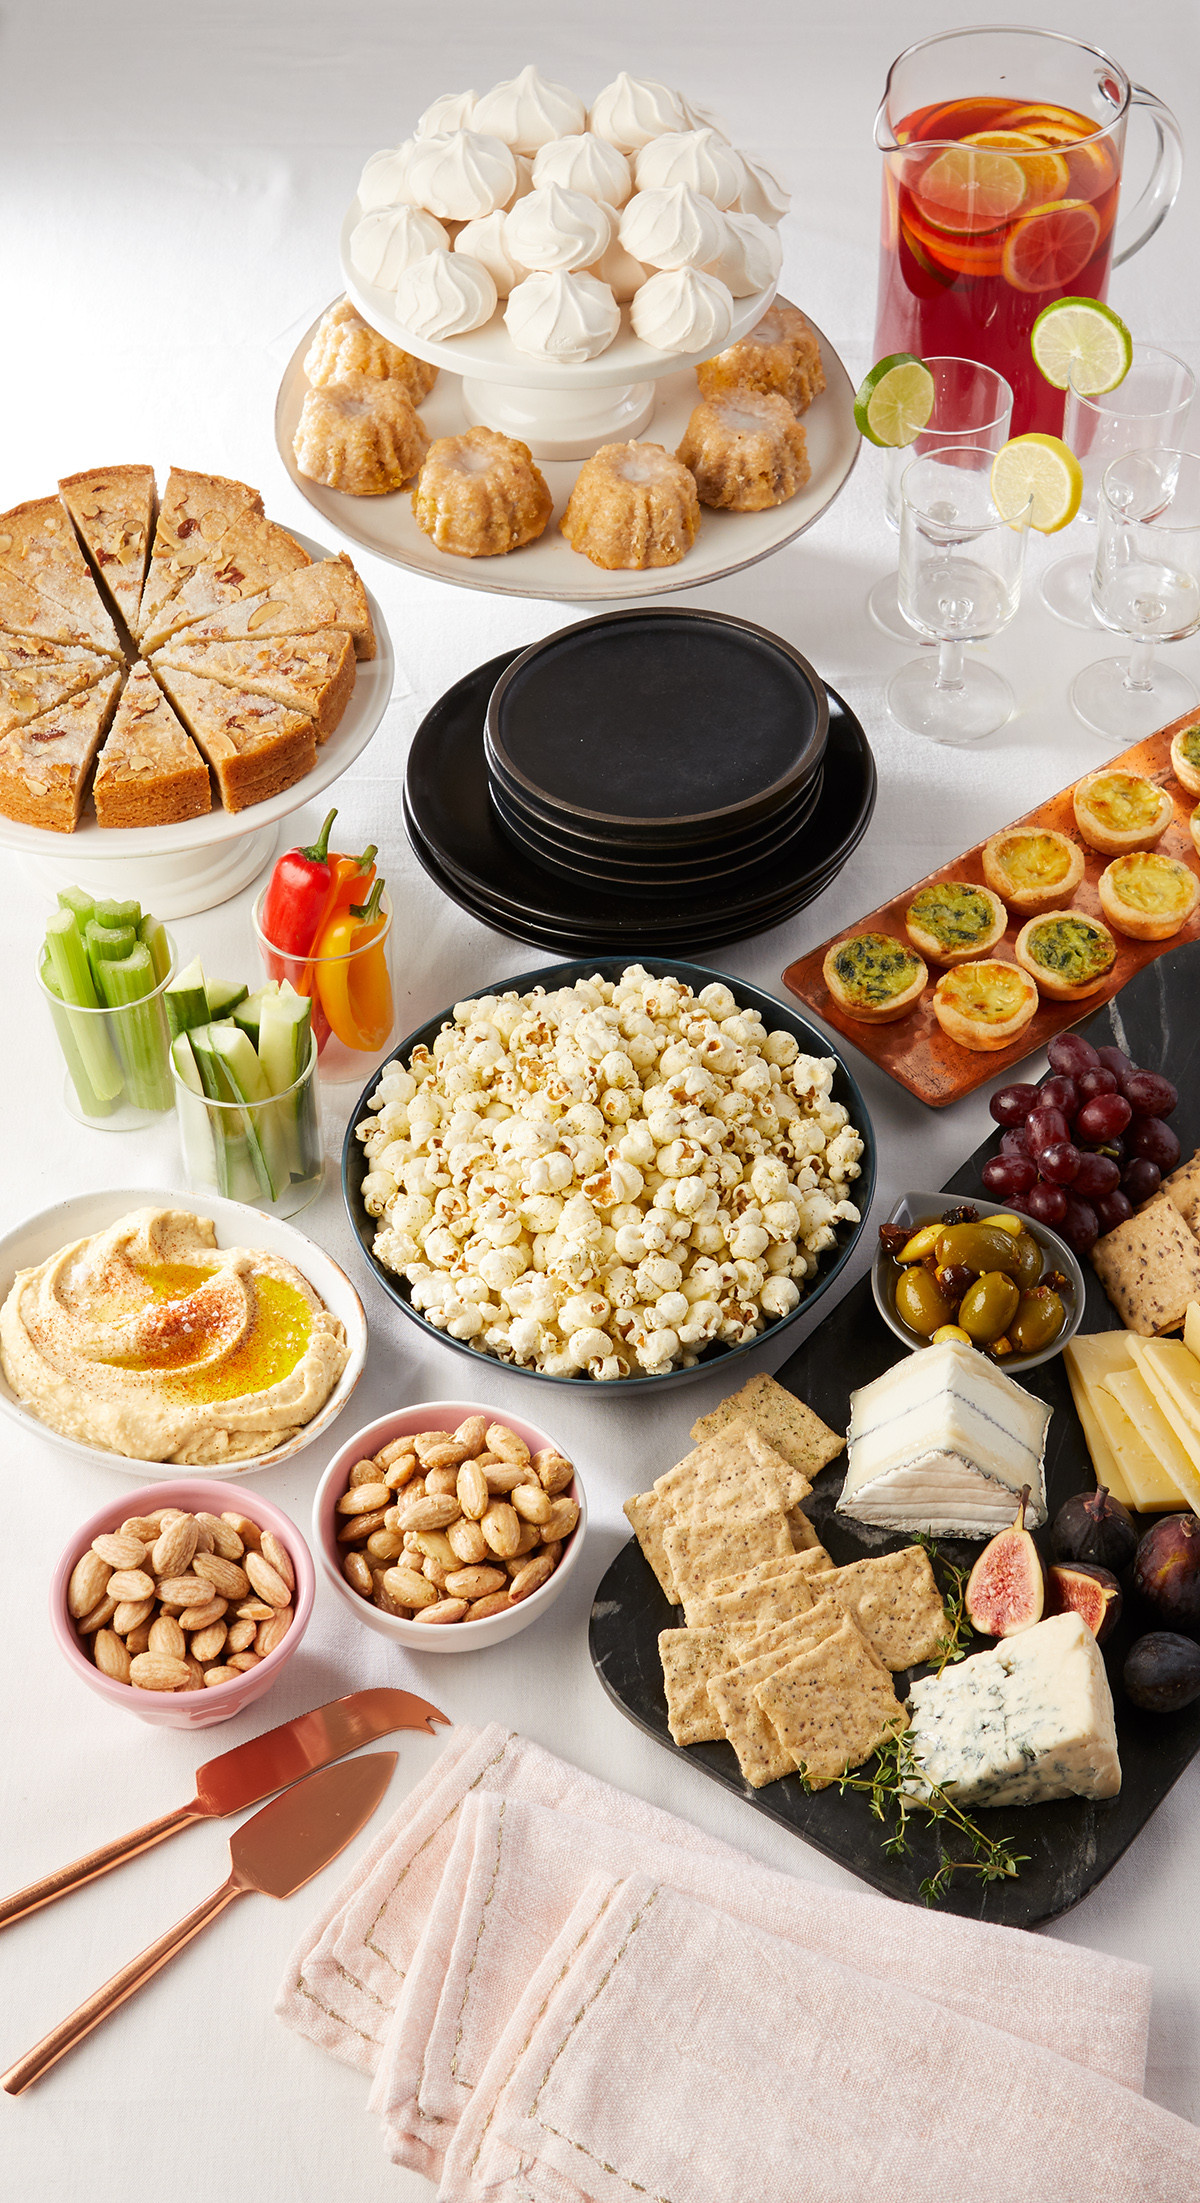 Menu Ideas For A Birthday Dinner Party
 Host an Appetizers ly Dinner Party Finger Food Ideas